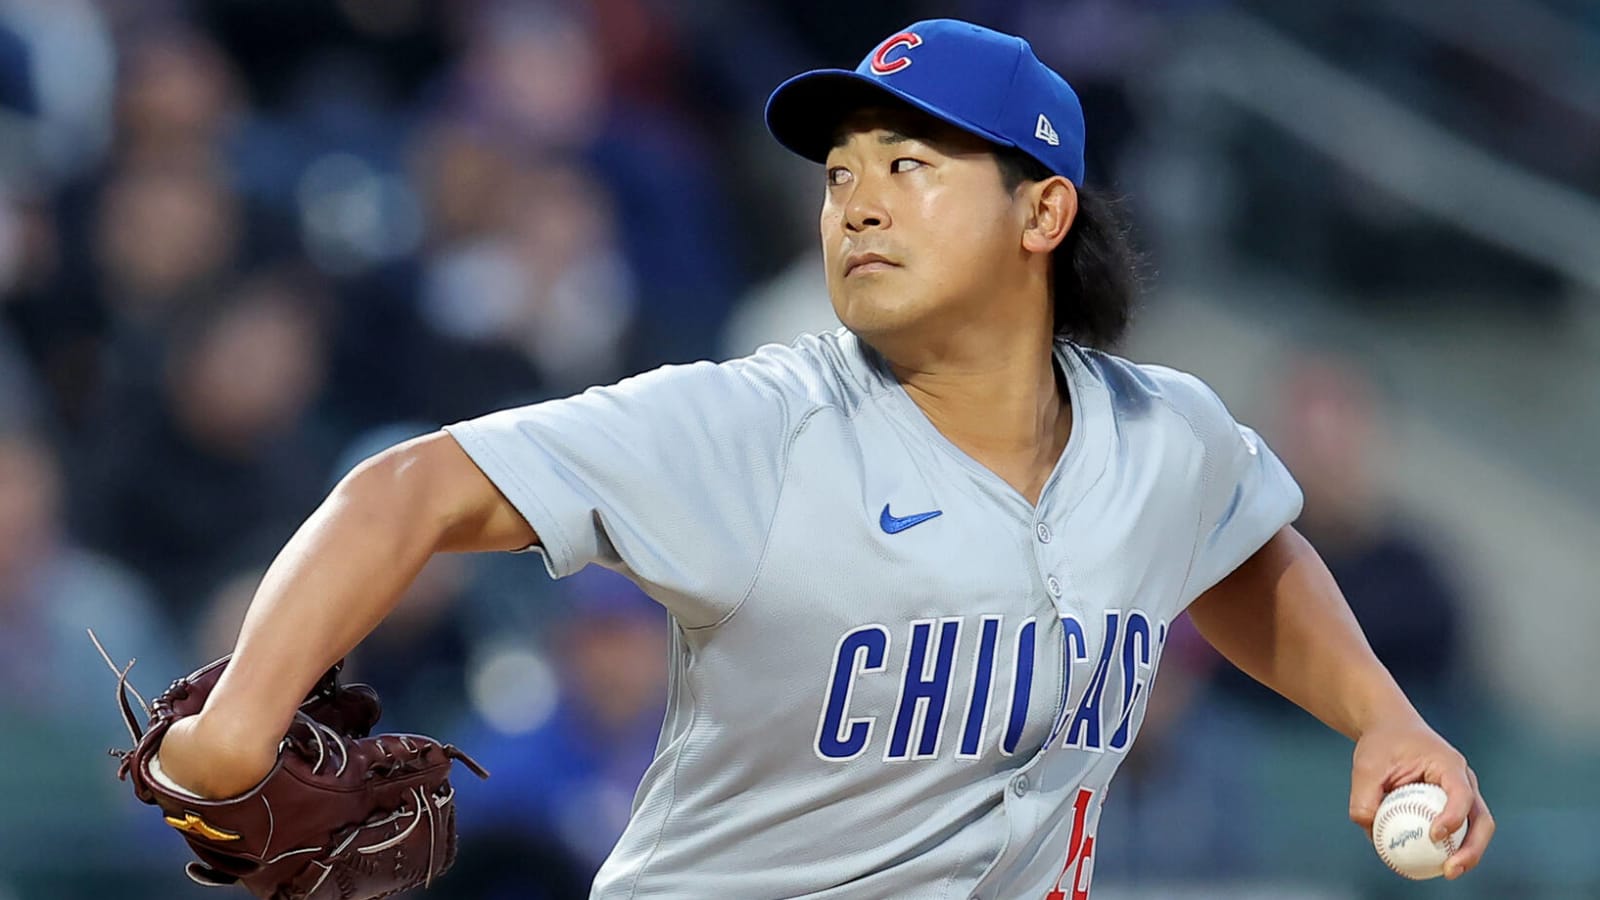 Cubs ace joins impressive club after latest outing